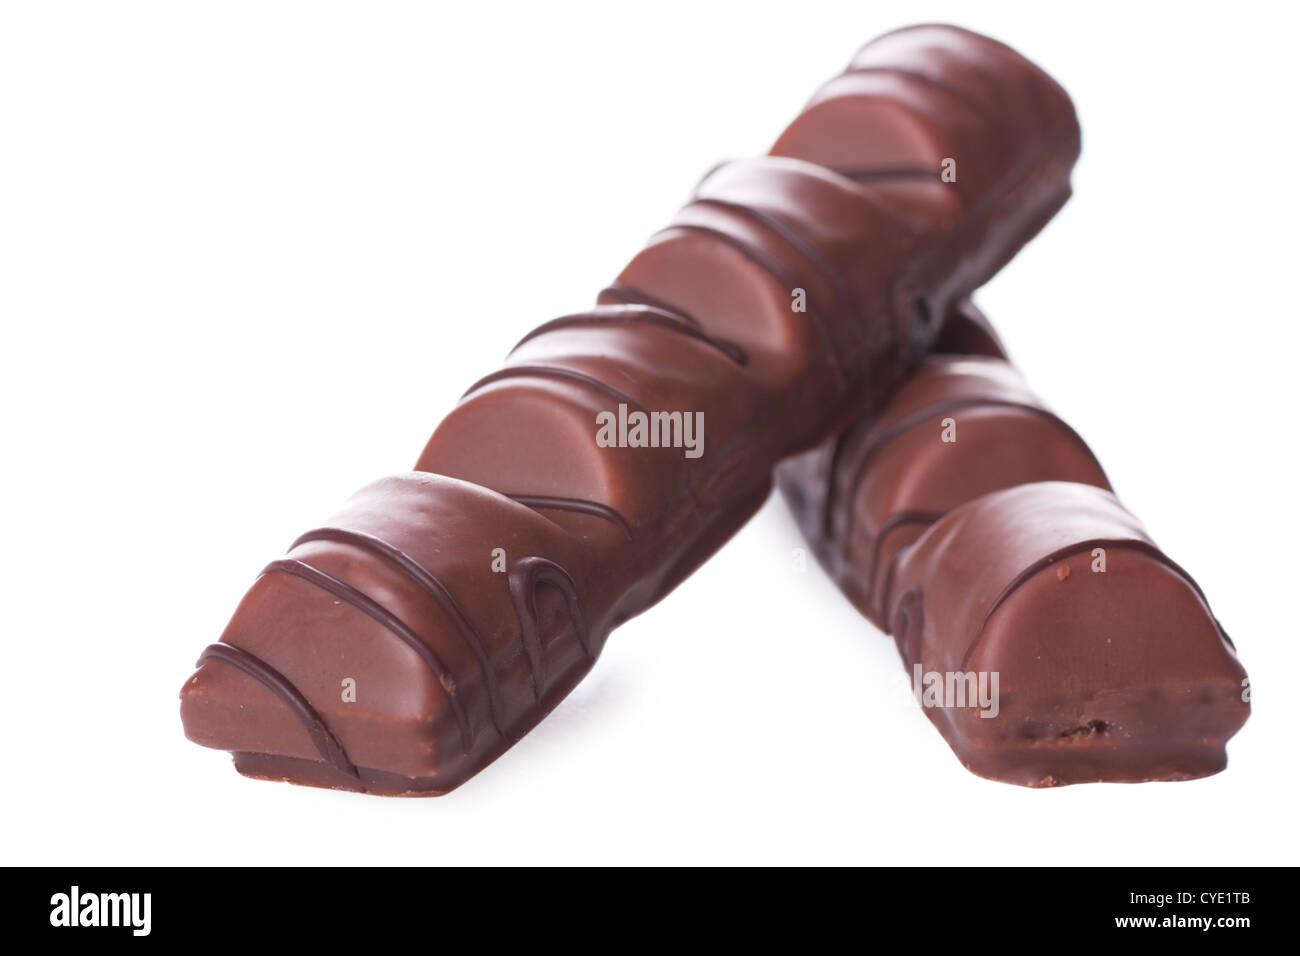 Closeup view of chocolate bar over white background Stock Photo